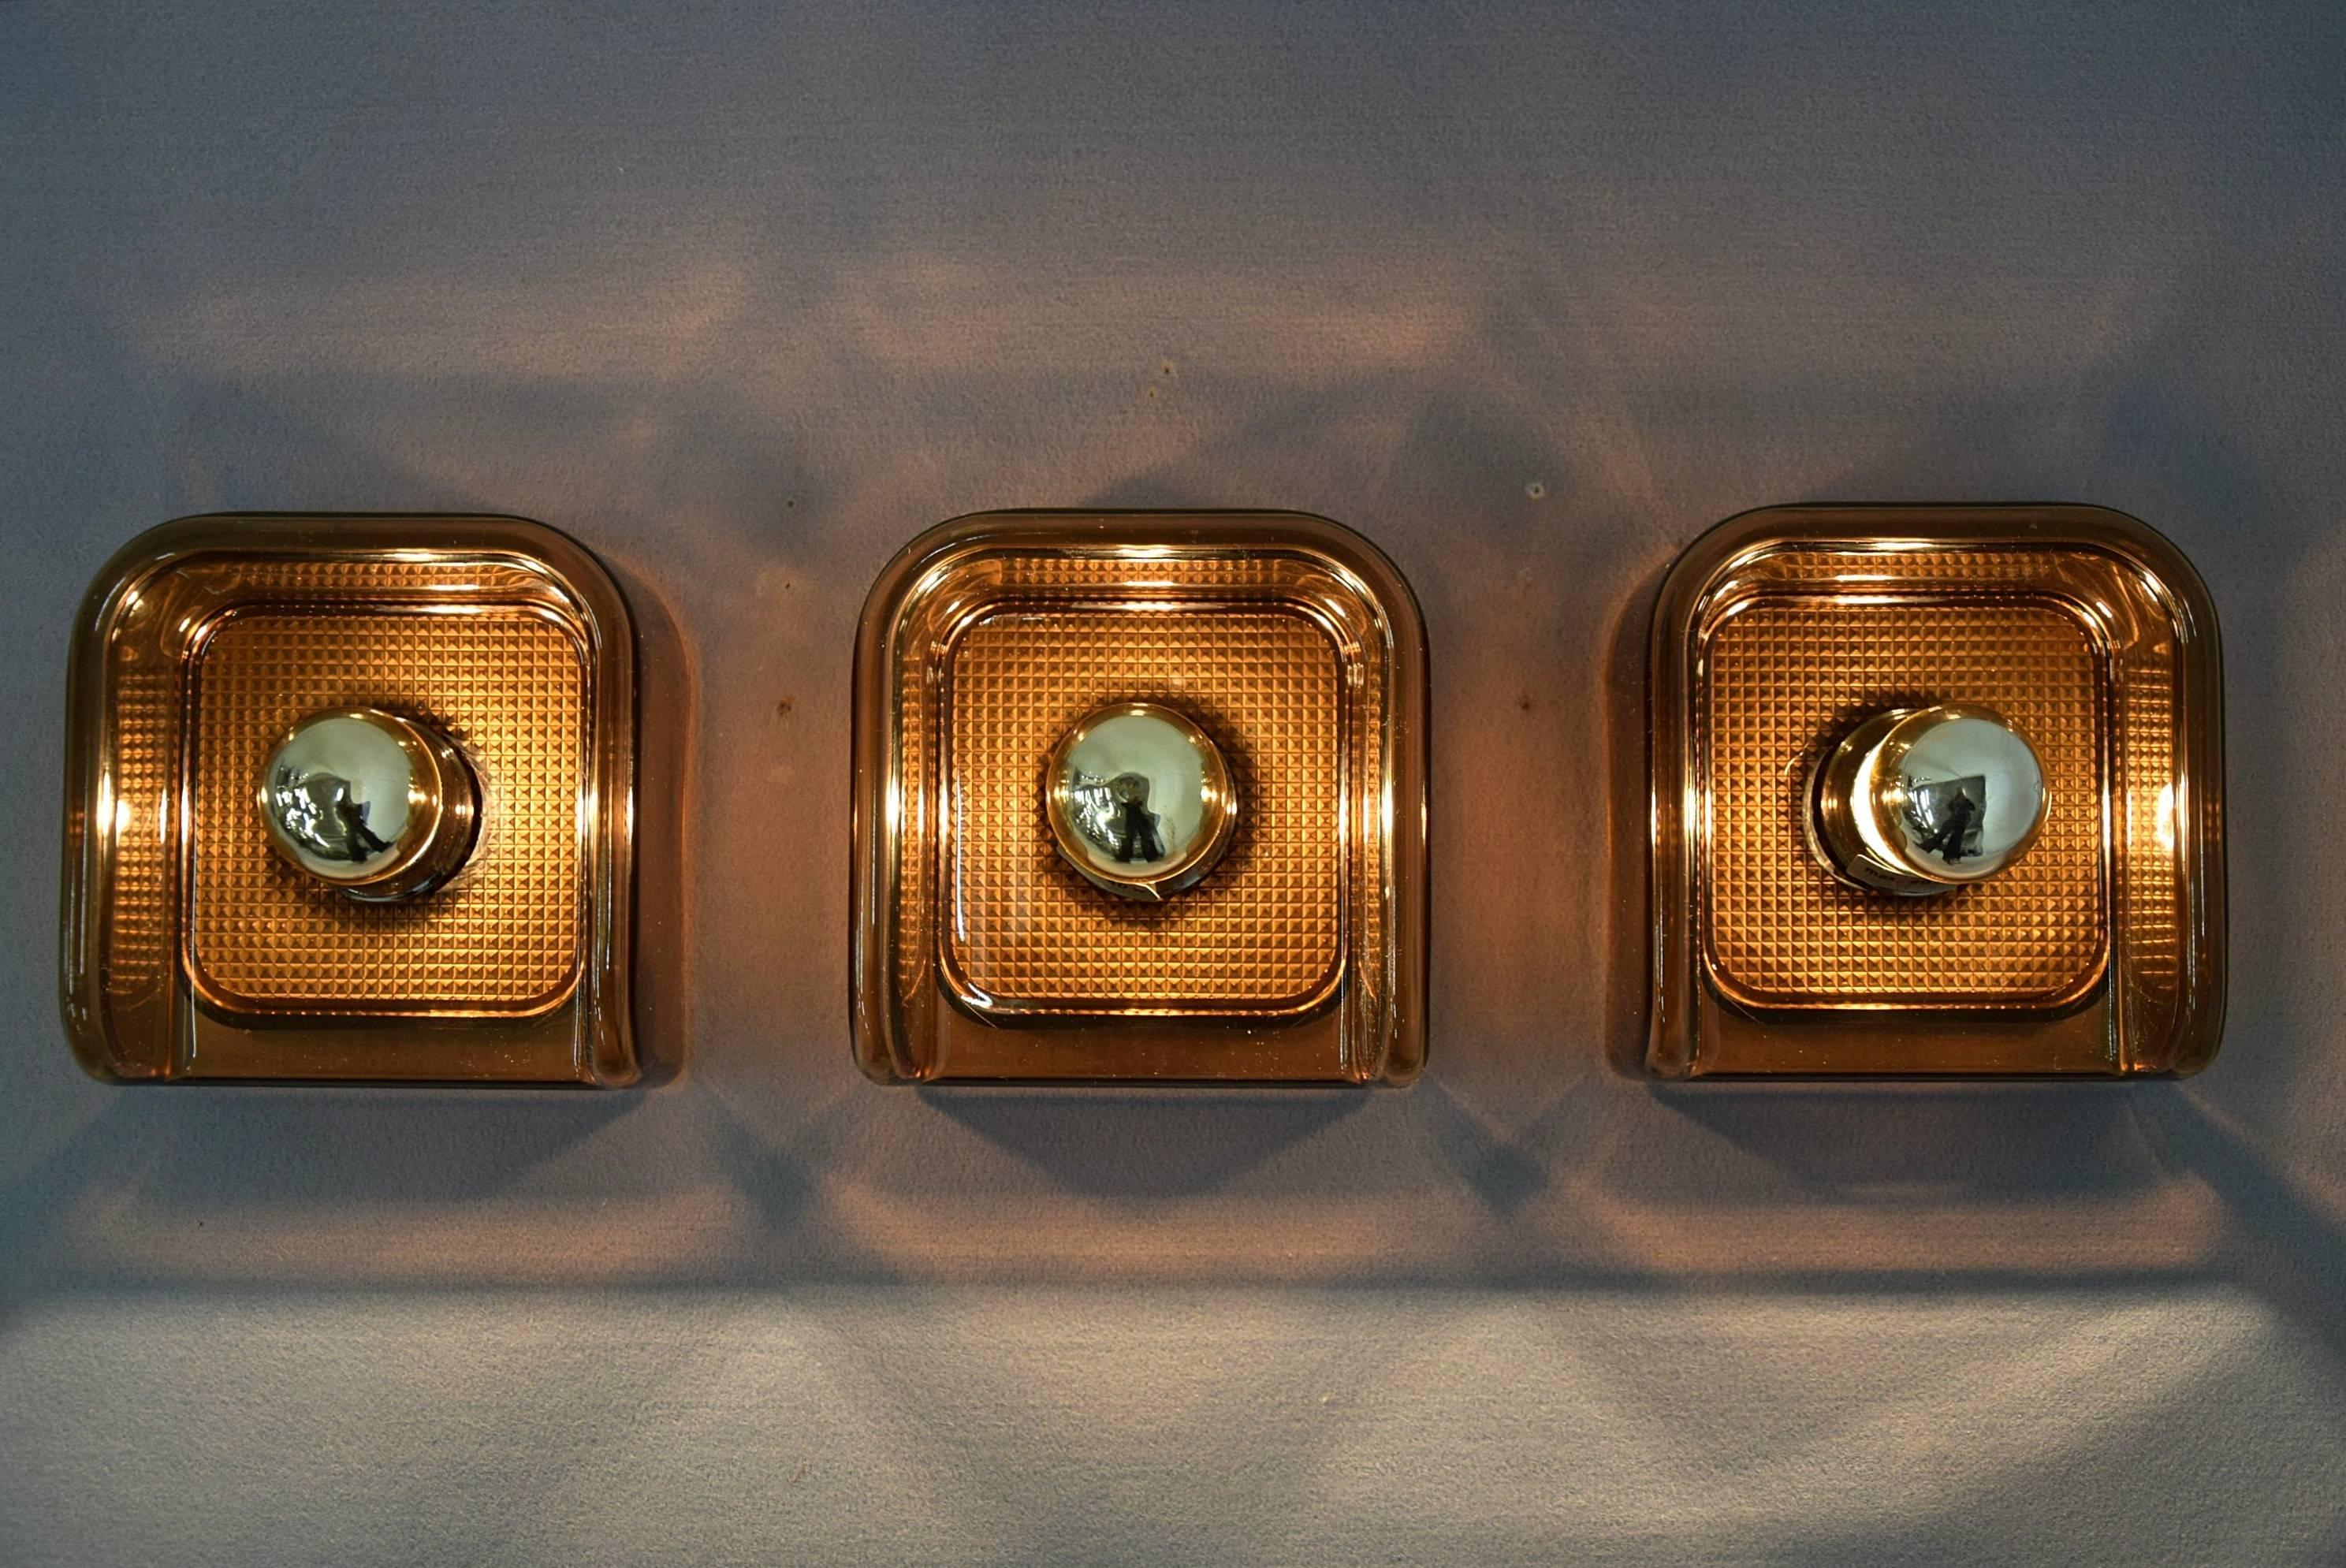 Three New old stock Mid Century Modern Guzzini wall lights.
10 Pieces available new in box.

Measurements: H 15 x W 15 x D 9 cm.

Price is for 3 pcs.